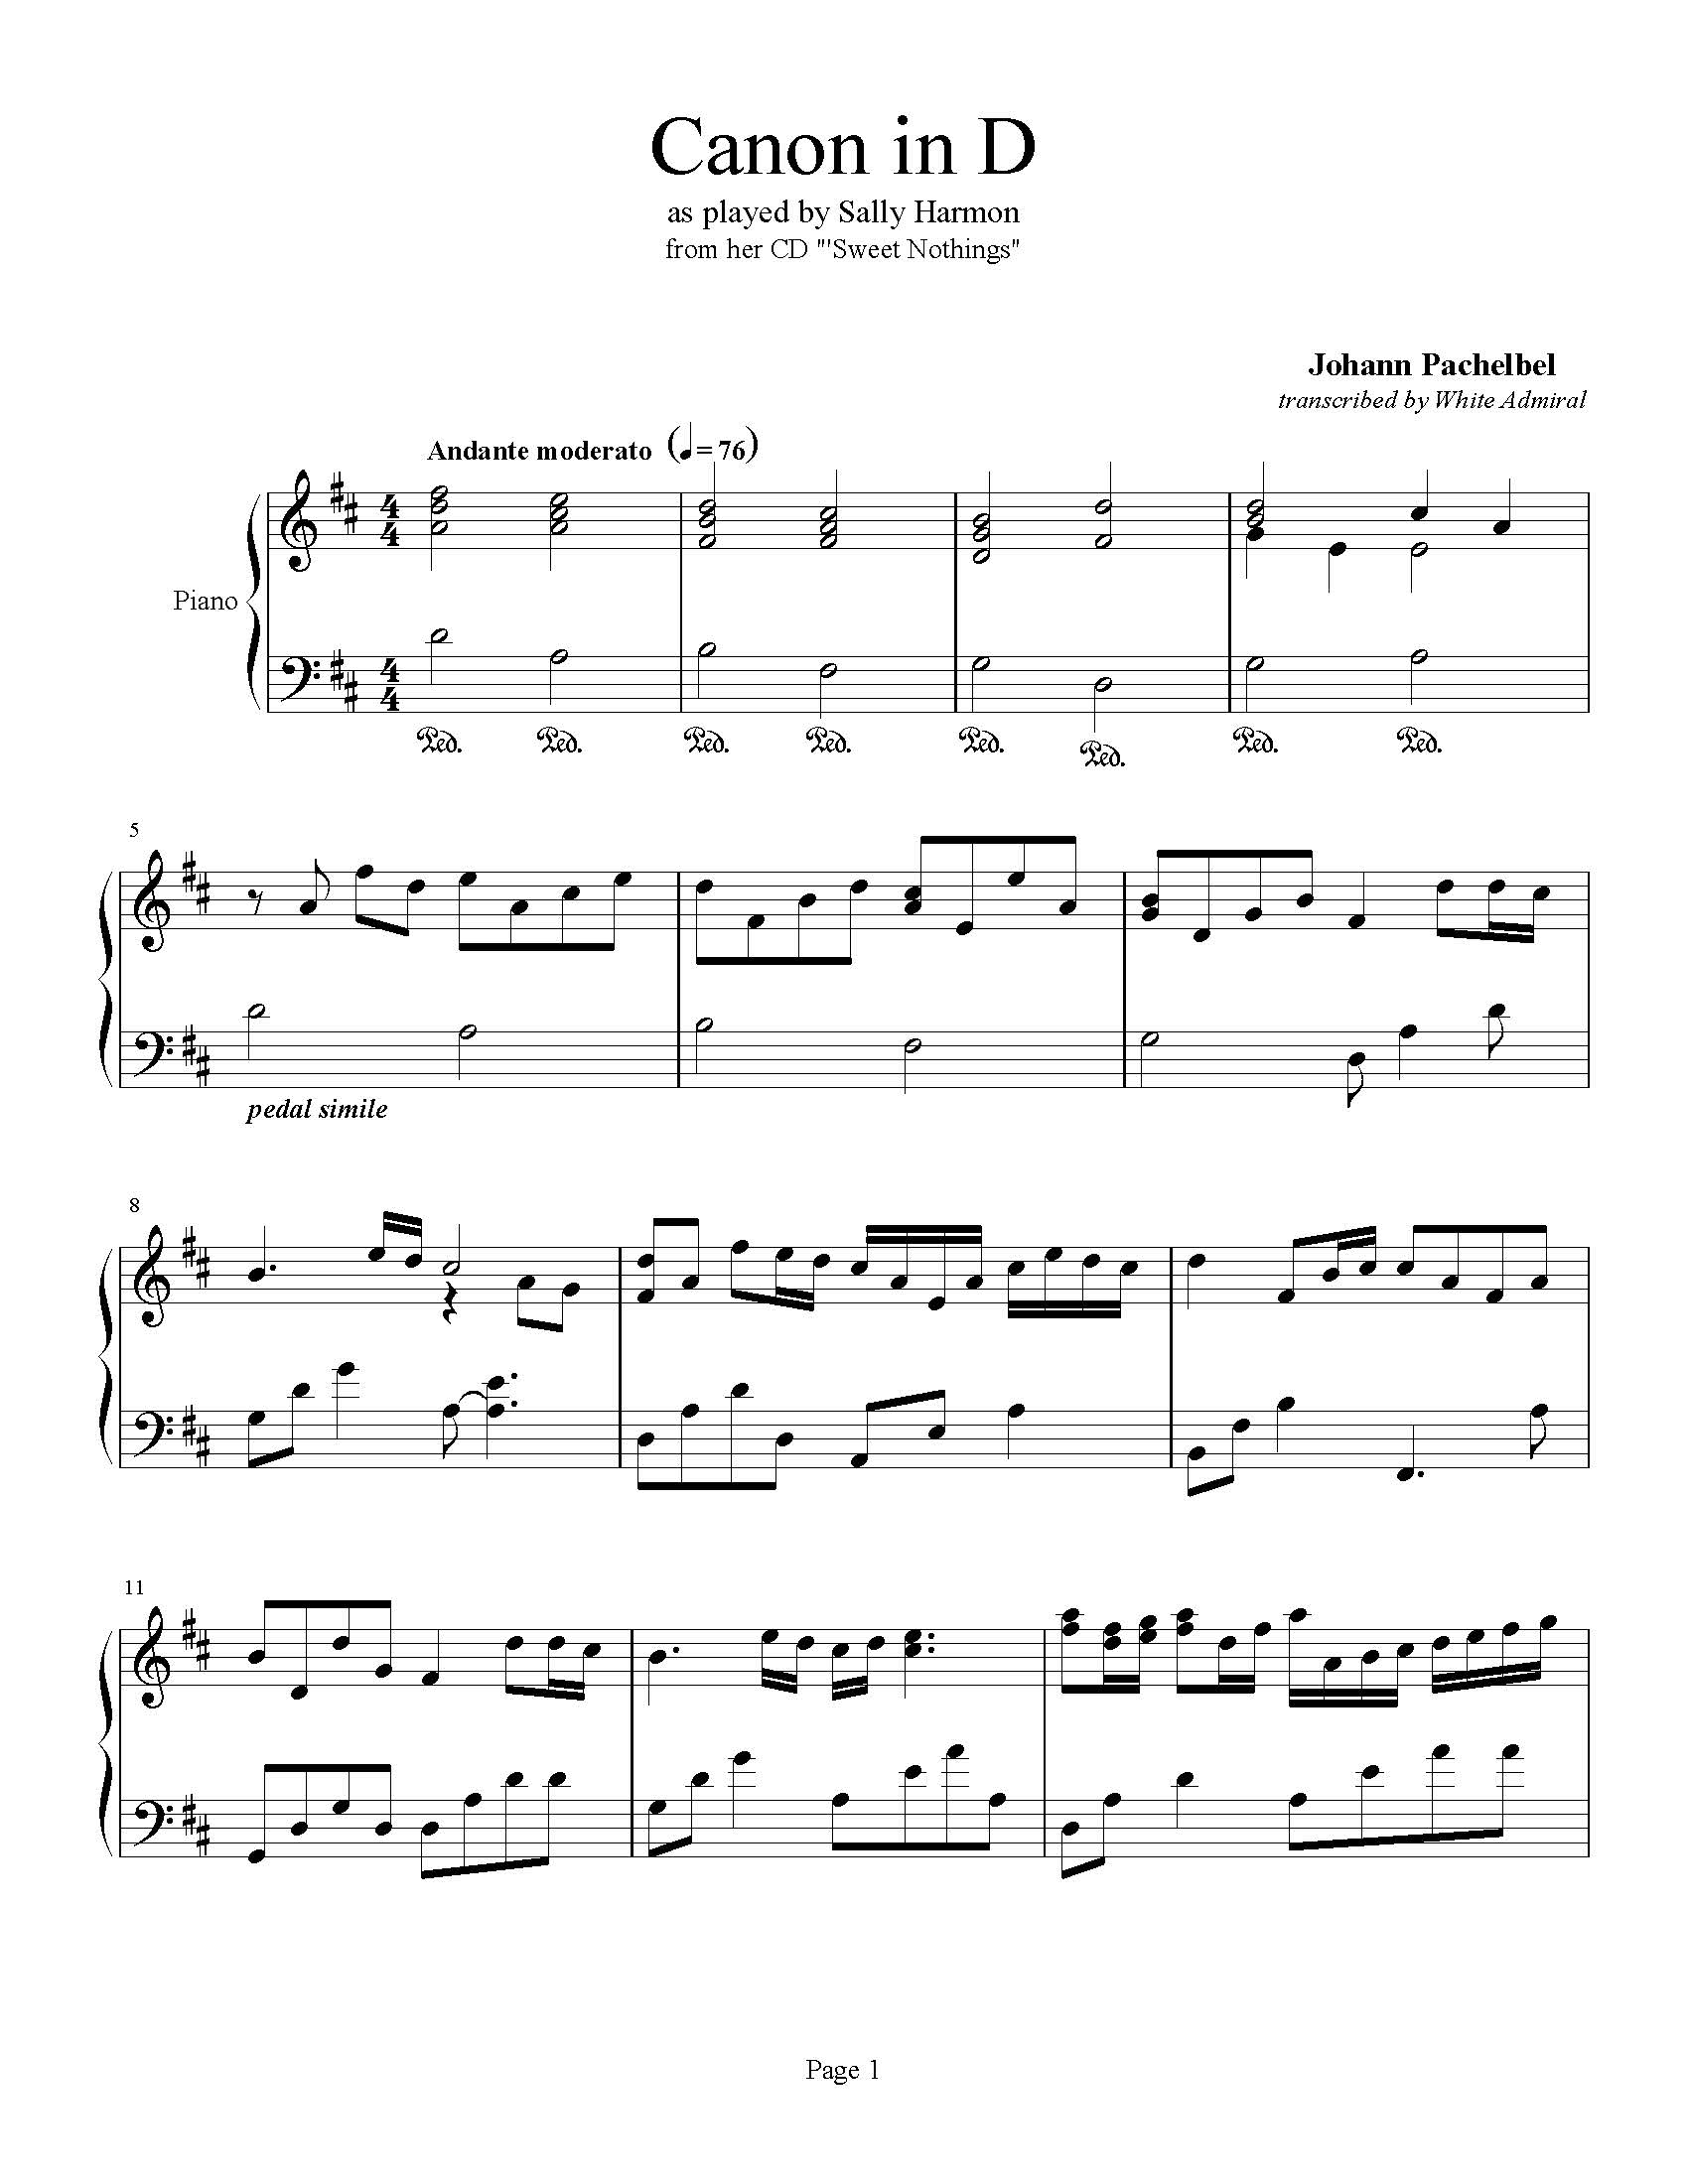 Johann Pachelbel "Canon in D" Sheet Music Notes | Download Printable ...